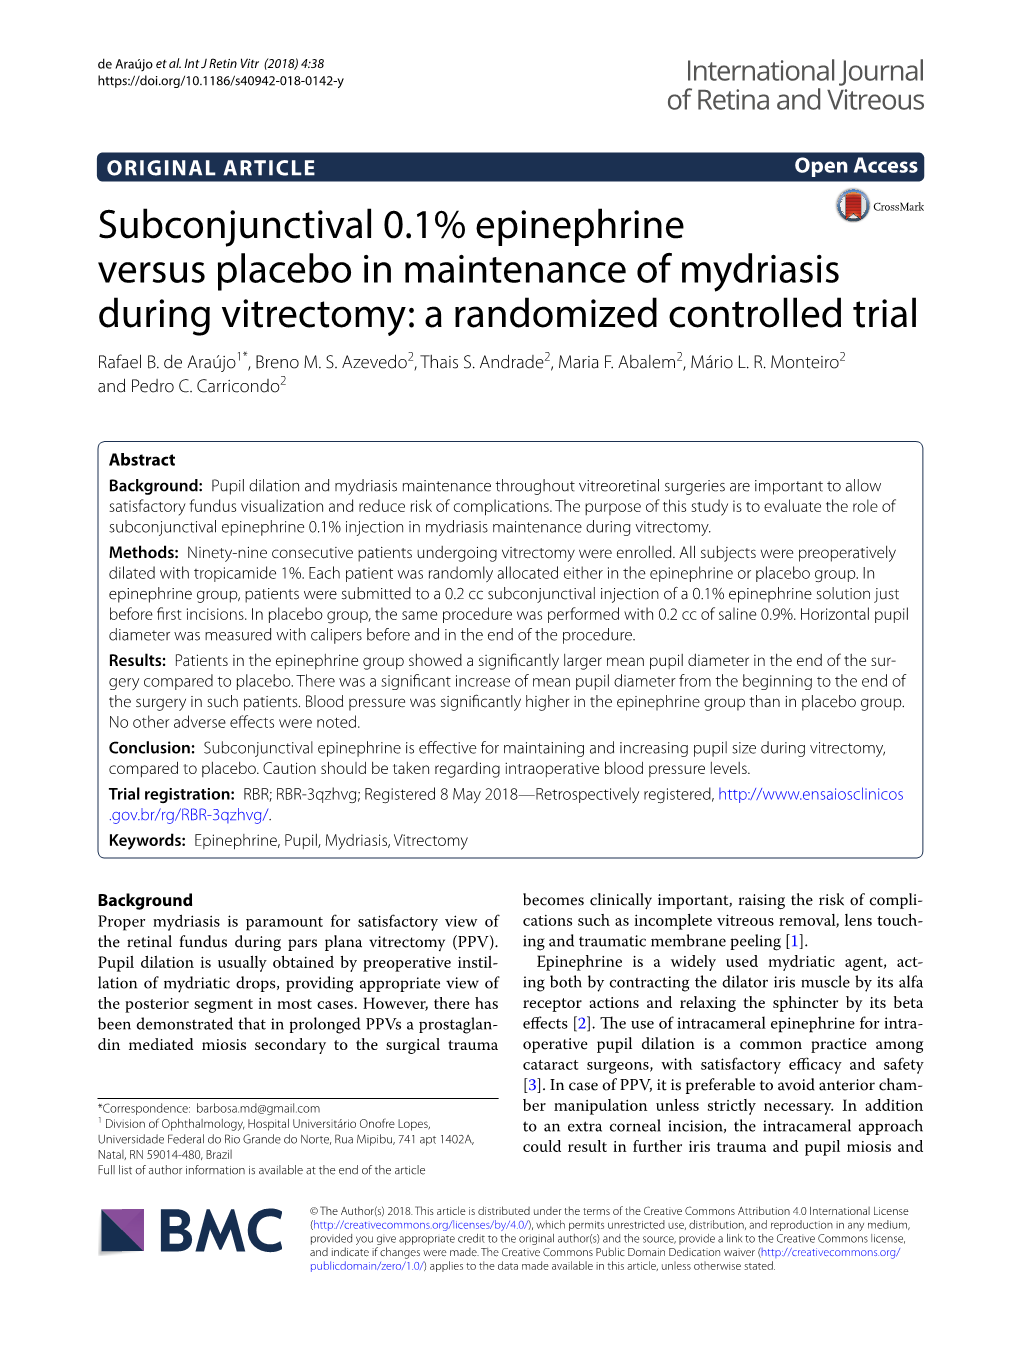 Subconjunctival 0.1% Epinephrine Versus Placebo in Maintenance of Mydriasis During Vitrectomy: a Randomized Controlled Trial Rafael B